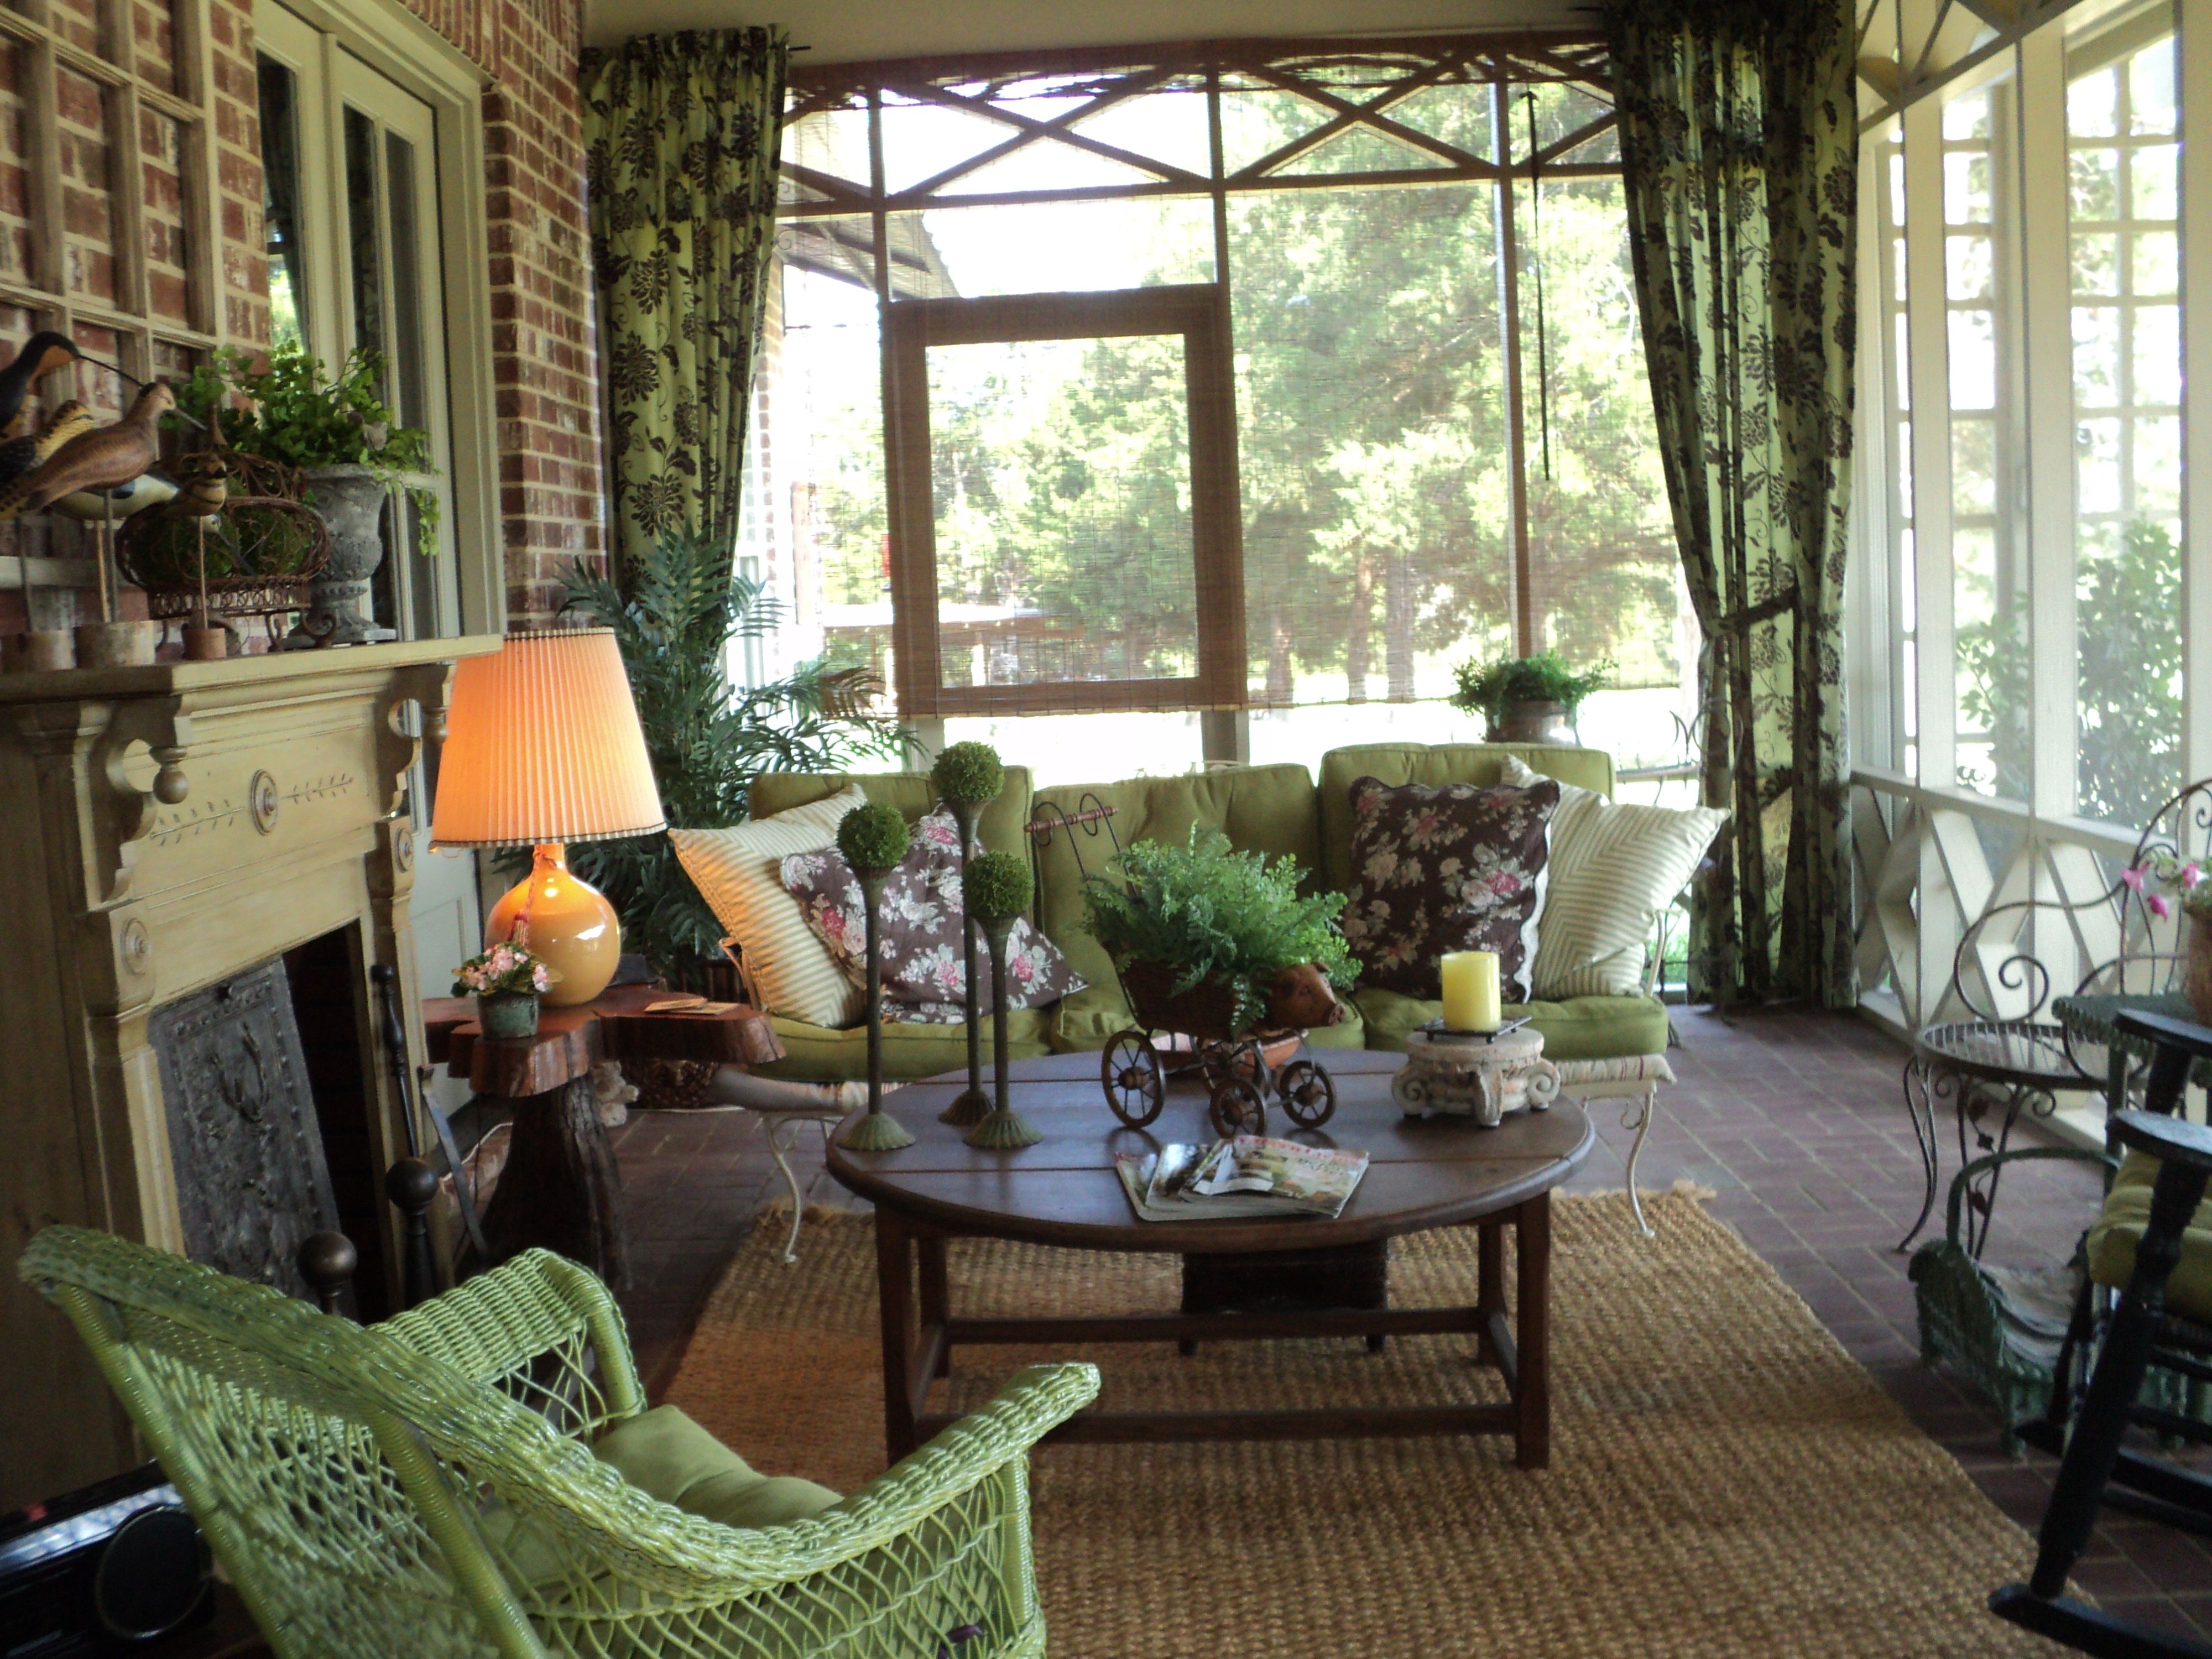 My cozy country porch | Outdoor Living, Porches & Patios | Pinterest ...